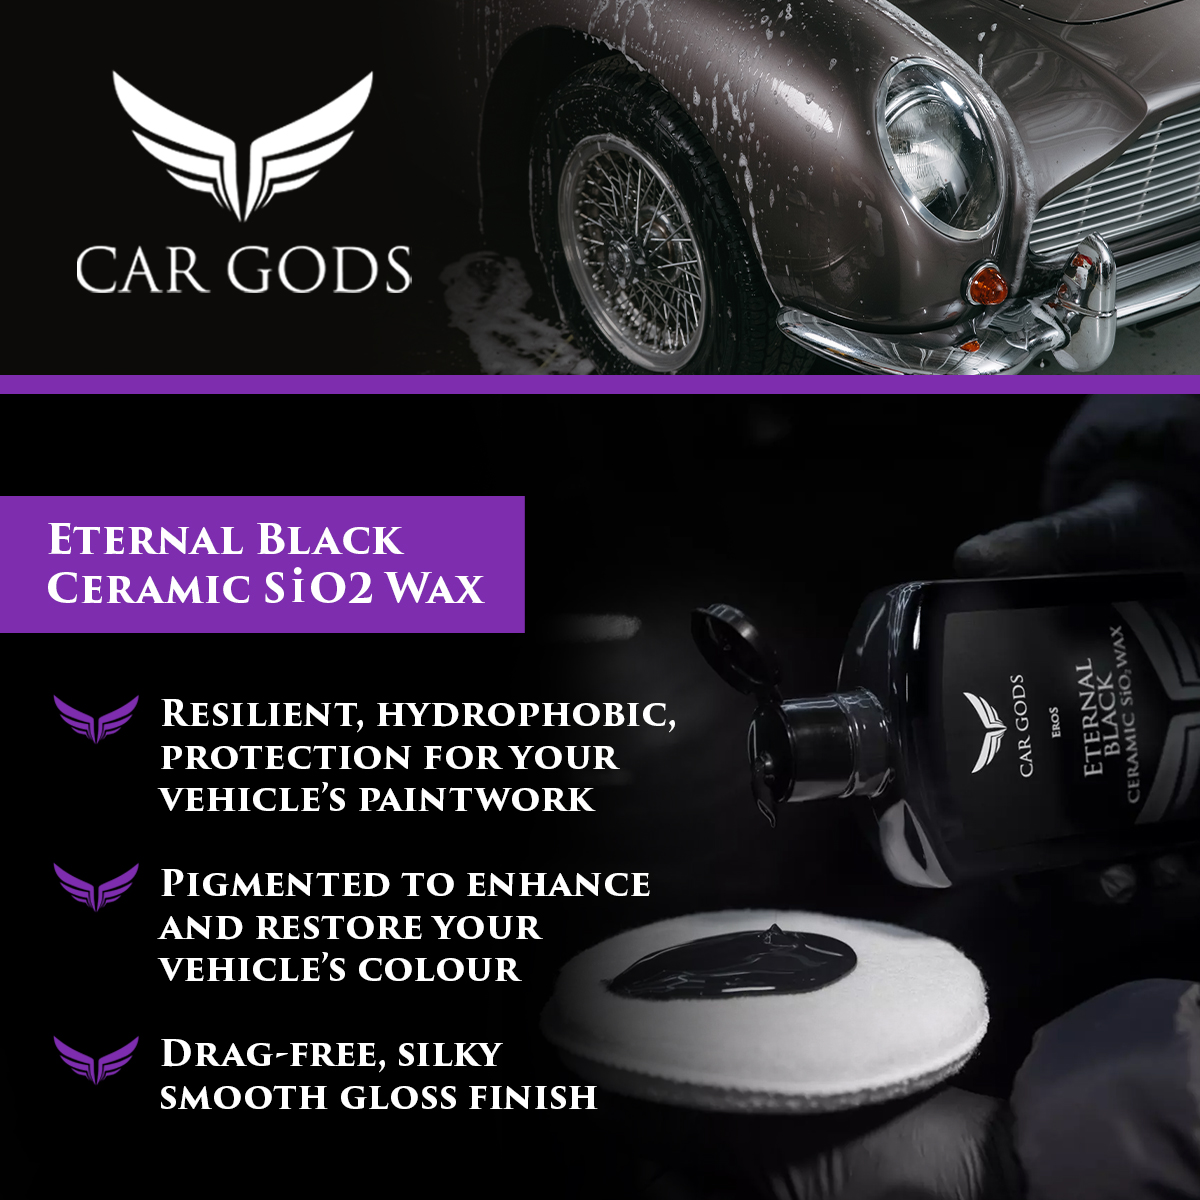 Car Gods Eternal Black Ceramic SiO2 Wax. Pigmented to enhance and restore your vehicle’s colour with a special blend of SiO2 ceramic and wax. Apply a resilient, hydrophobic, protection to your vehicle’s paintwork.